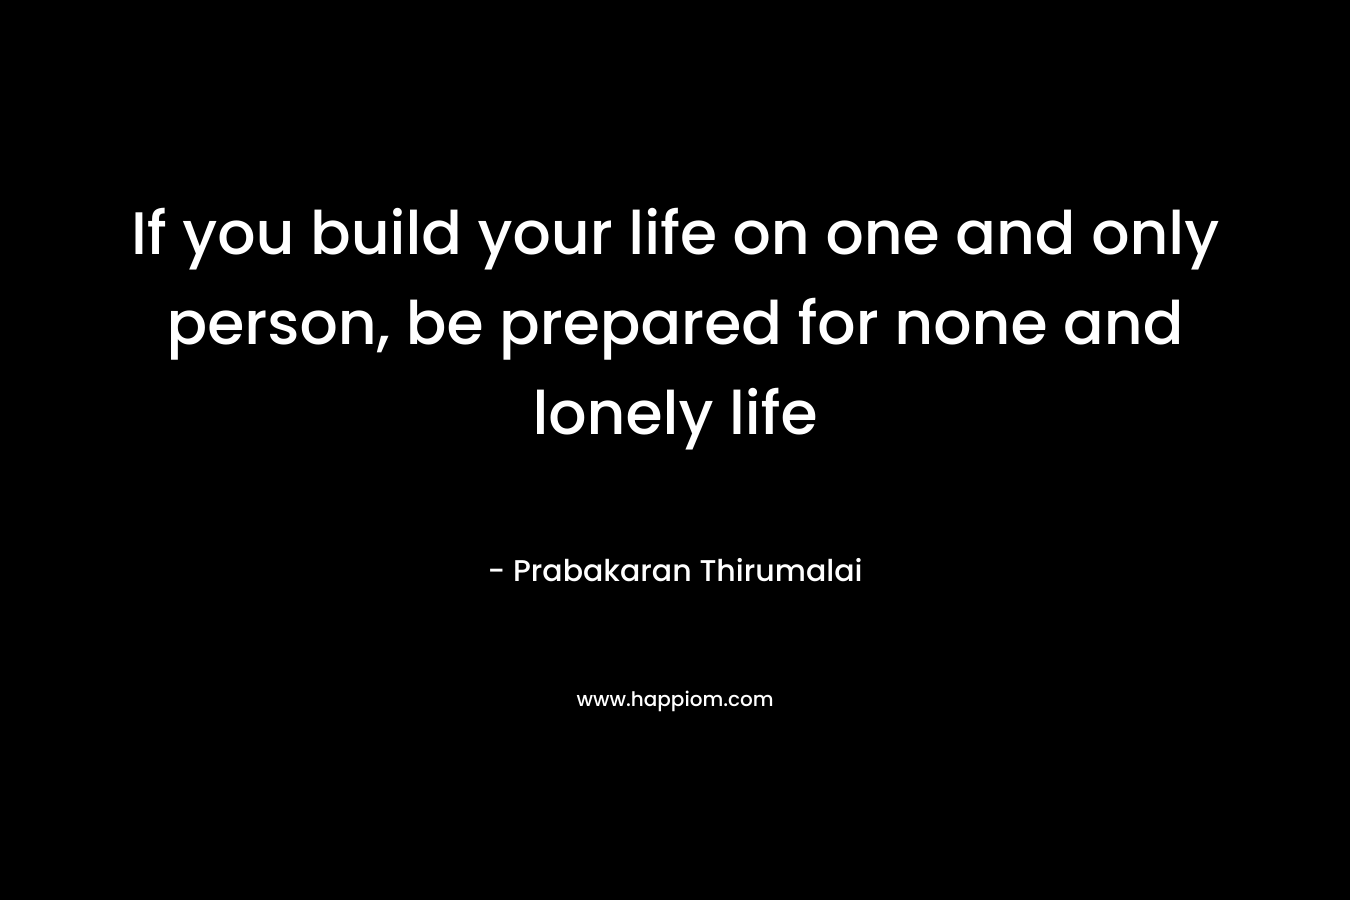 If you build your life on one and only person, be prepared for none and lonely life – Prabakaran Thirumalai